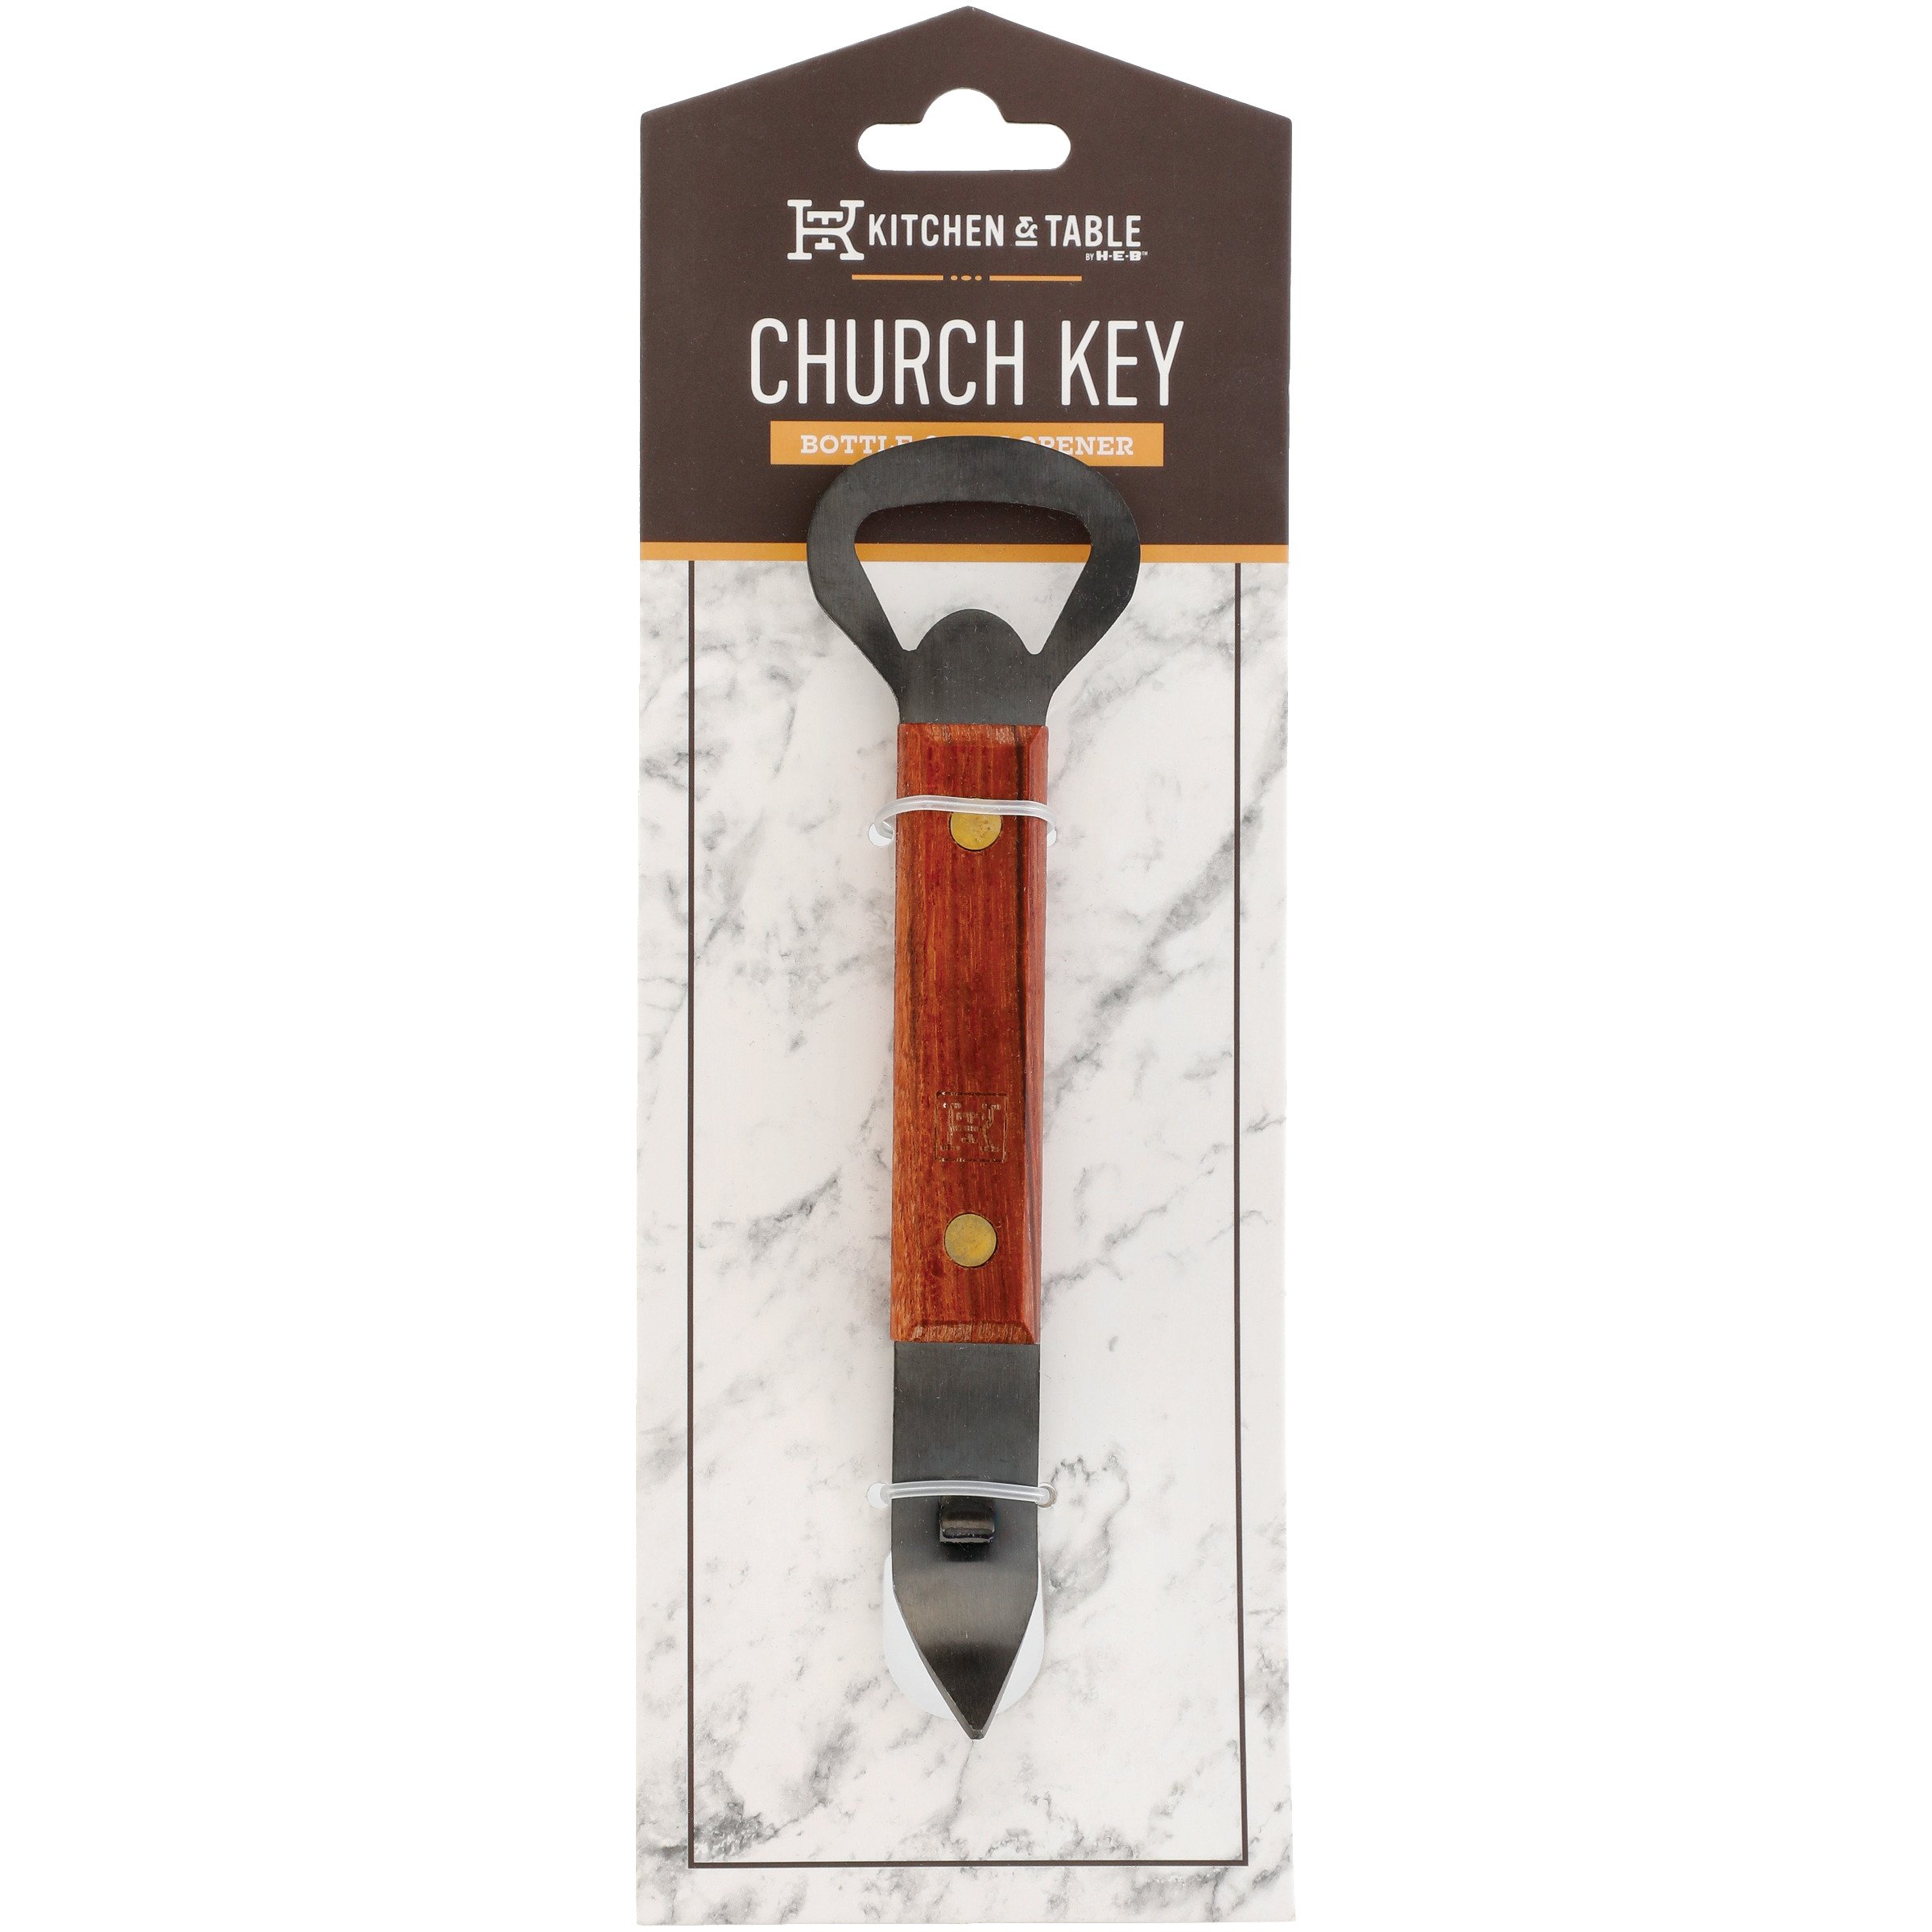 Choice 4 Church Key Can and Bottle Opener